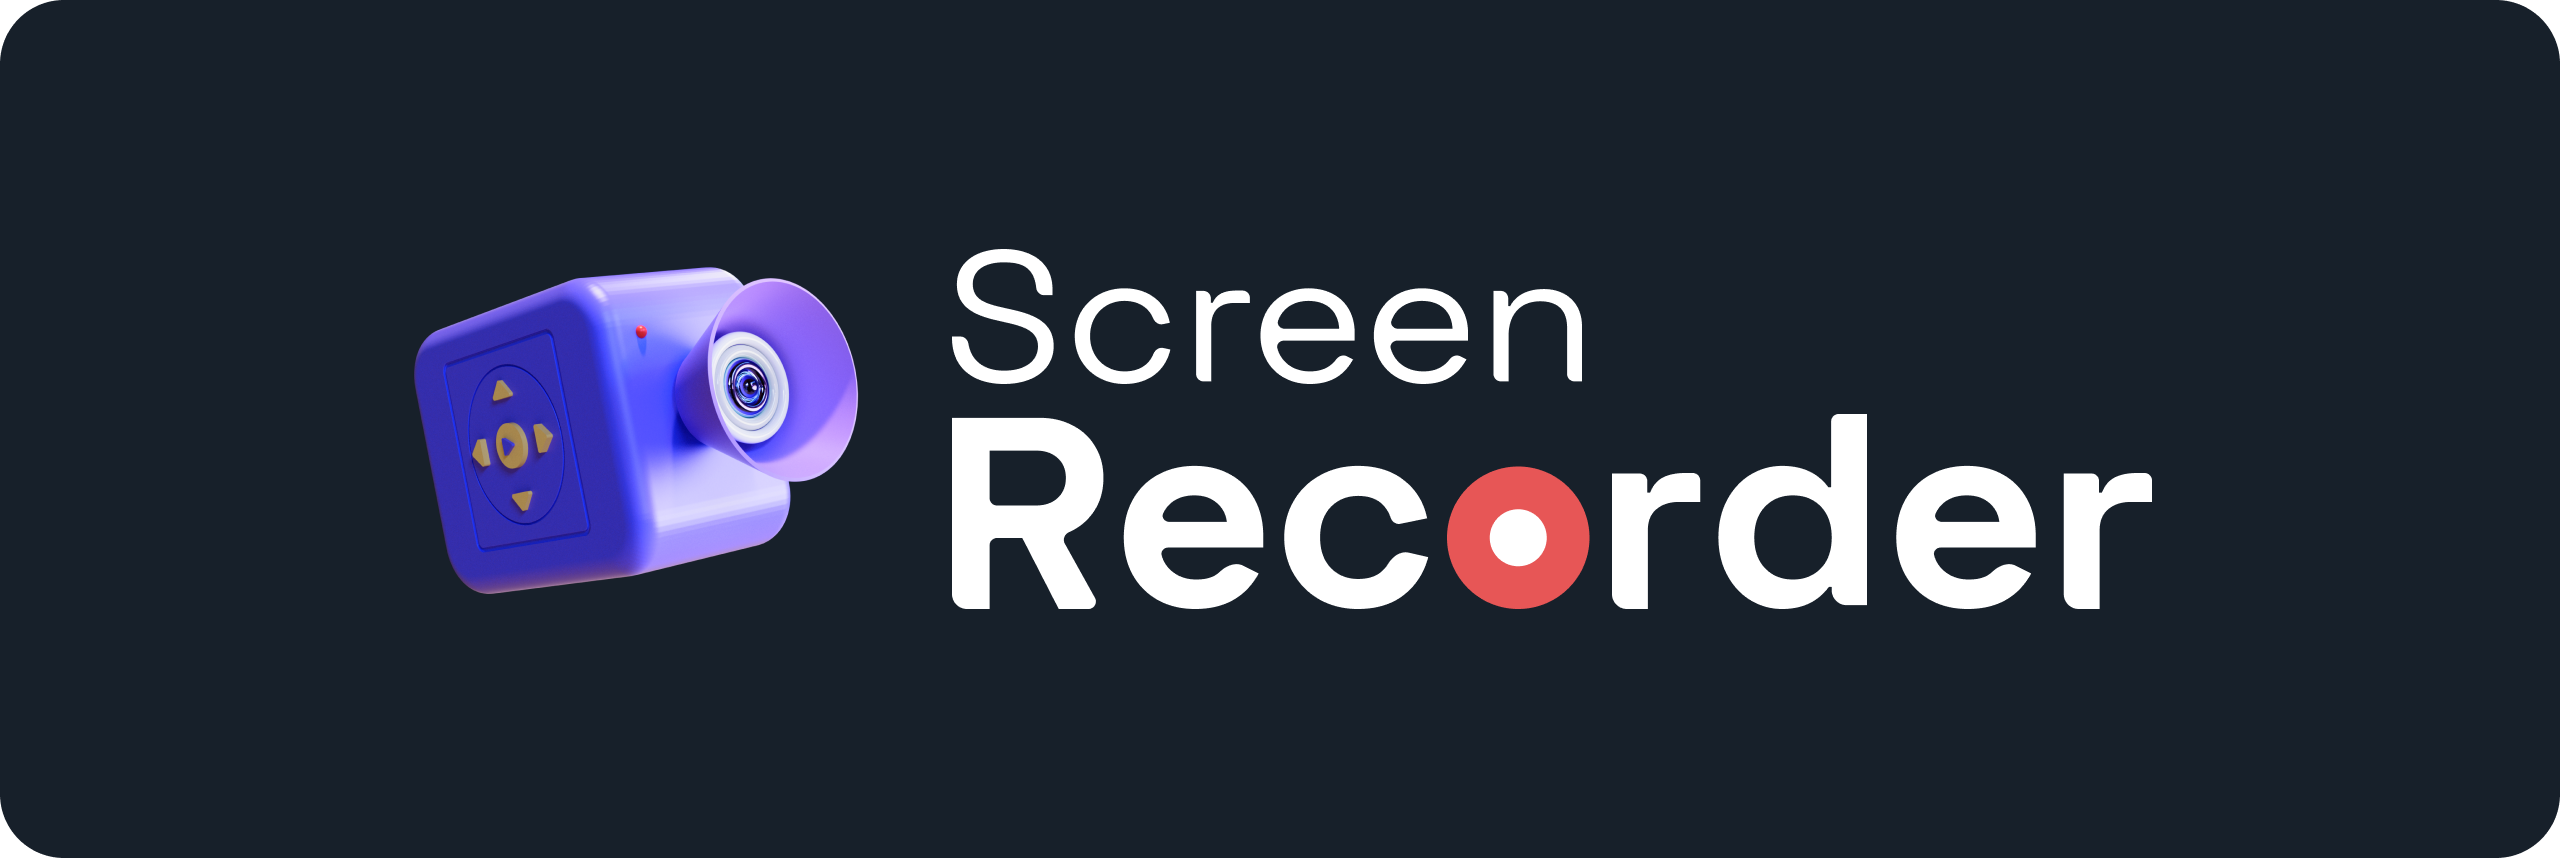 Best Screen Recorder: Record Videos in HD quality for FREE!